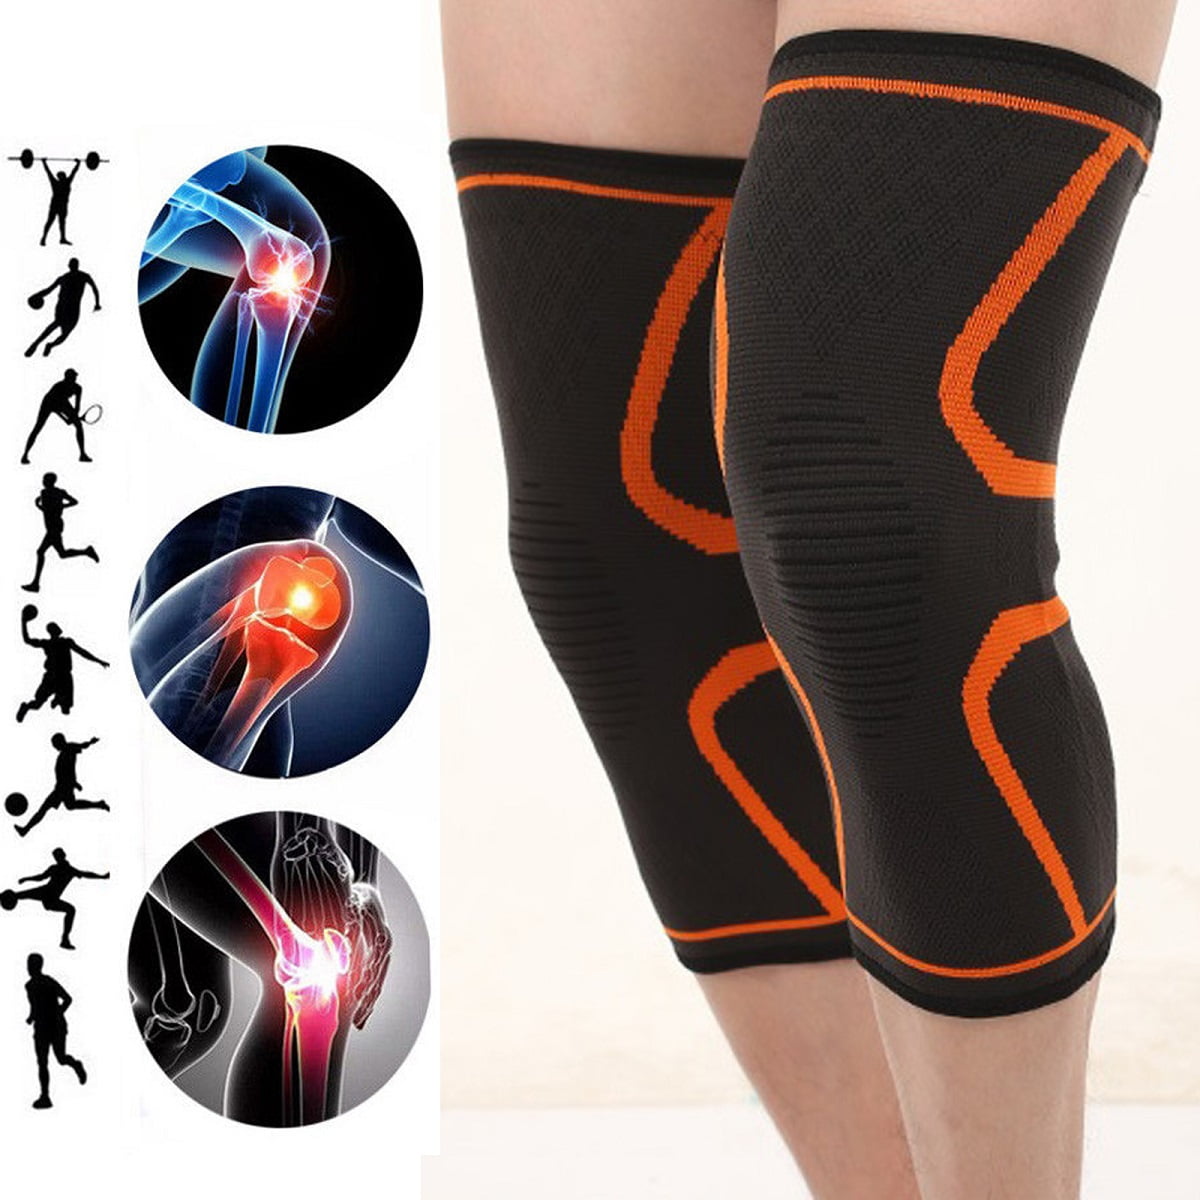 2X Arthritis Compression Sleeve Brace Support Knee For Joint Pain Relief Sport 